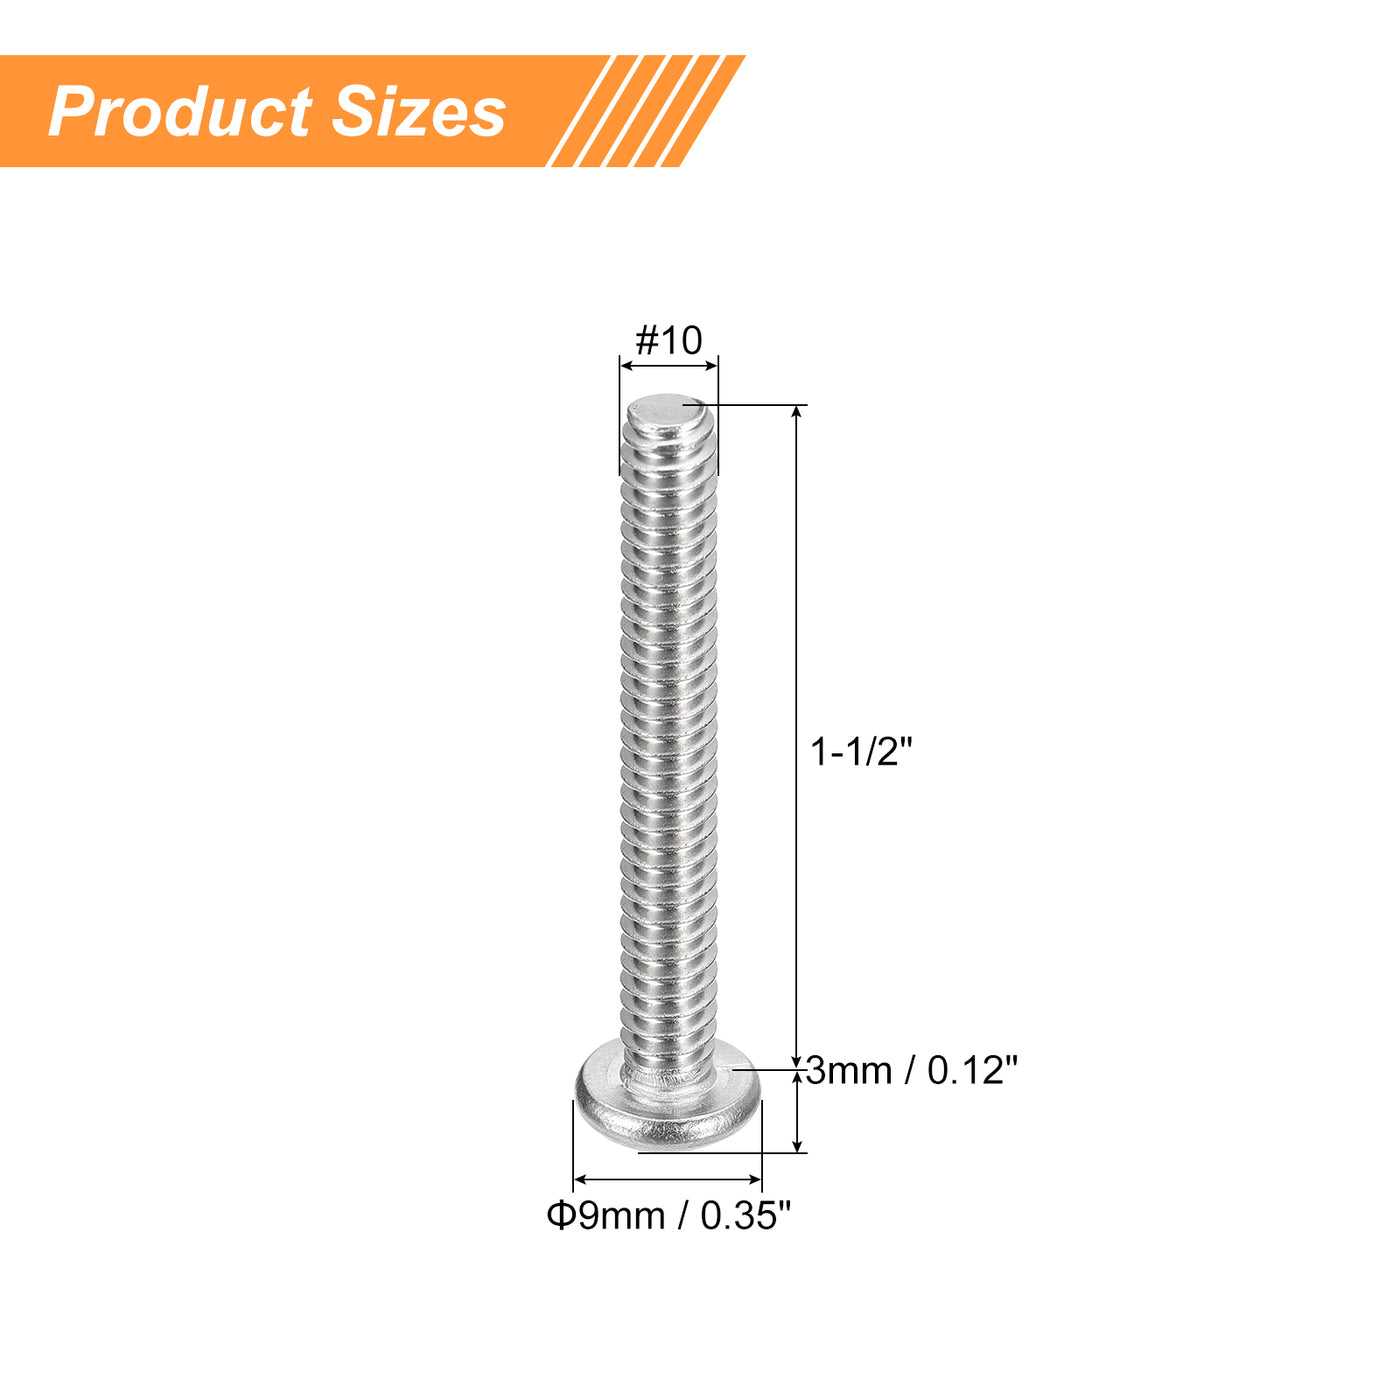 uxcell Uxcell #10-24x1-1/2" Pan Head Machine Screws, Stainless Steel 18-8 Screw, Pack of 20